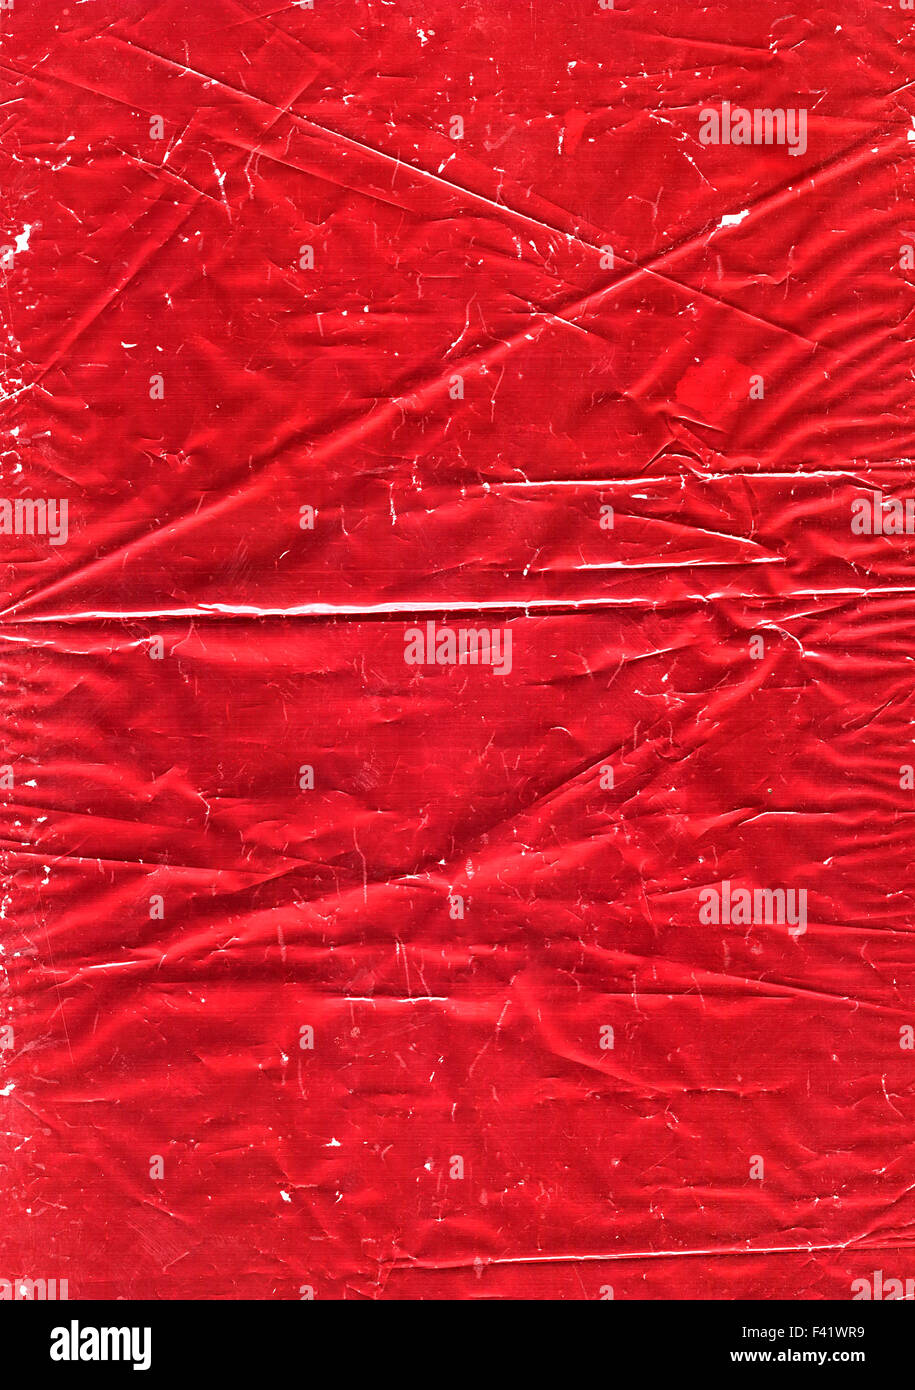 Old wrinkled red metallic wrapping paper background Stock Photo